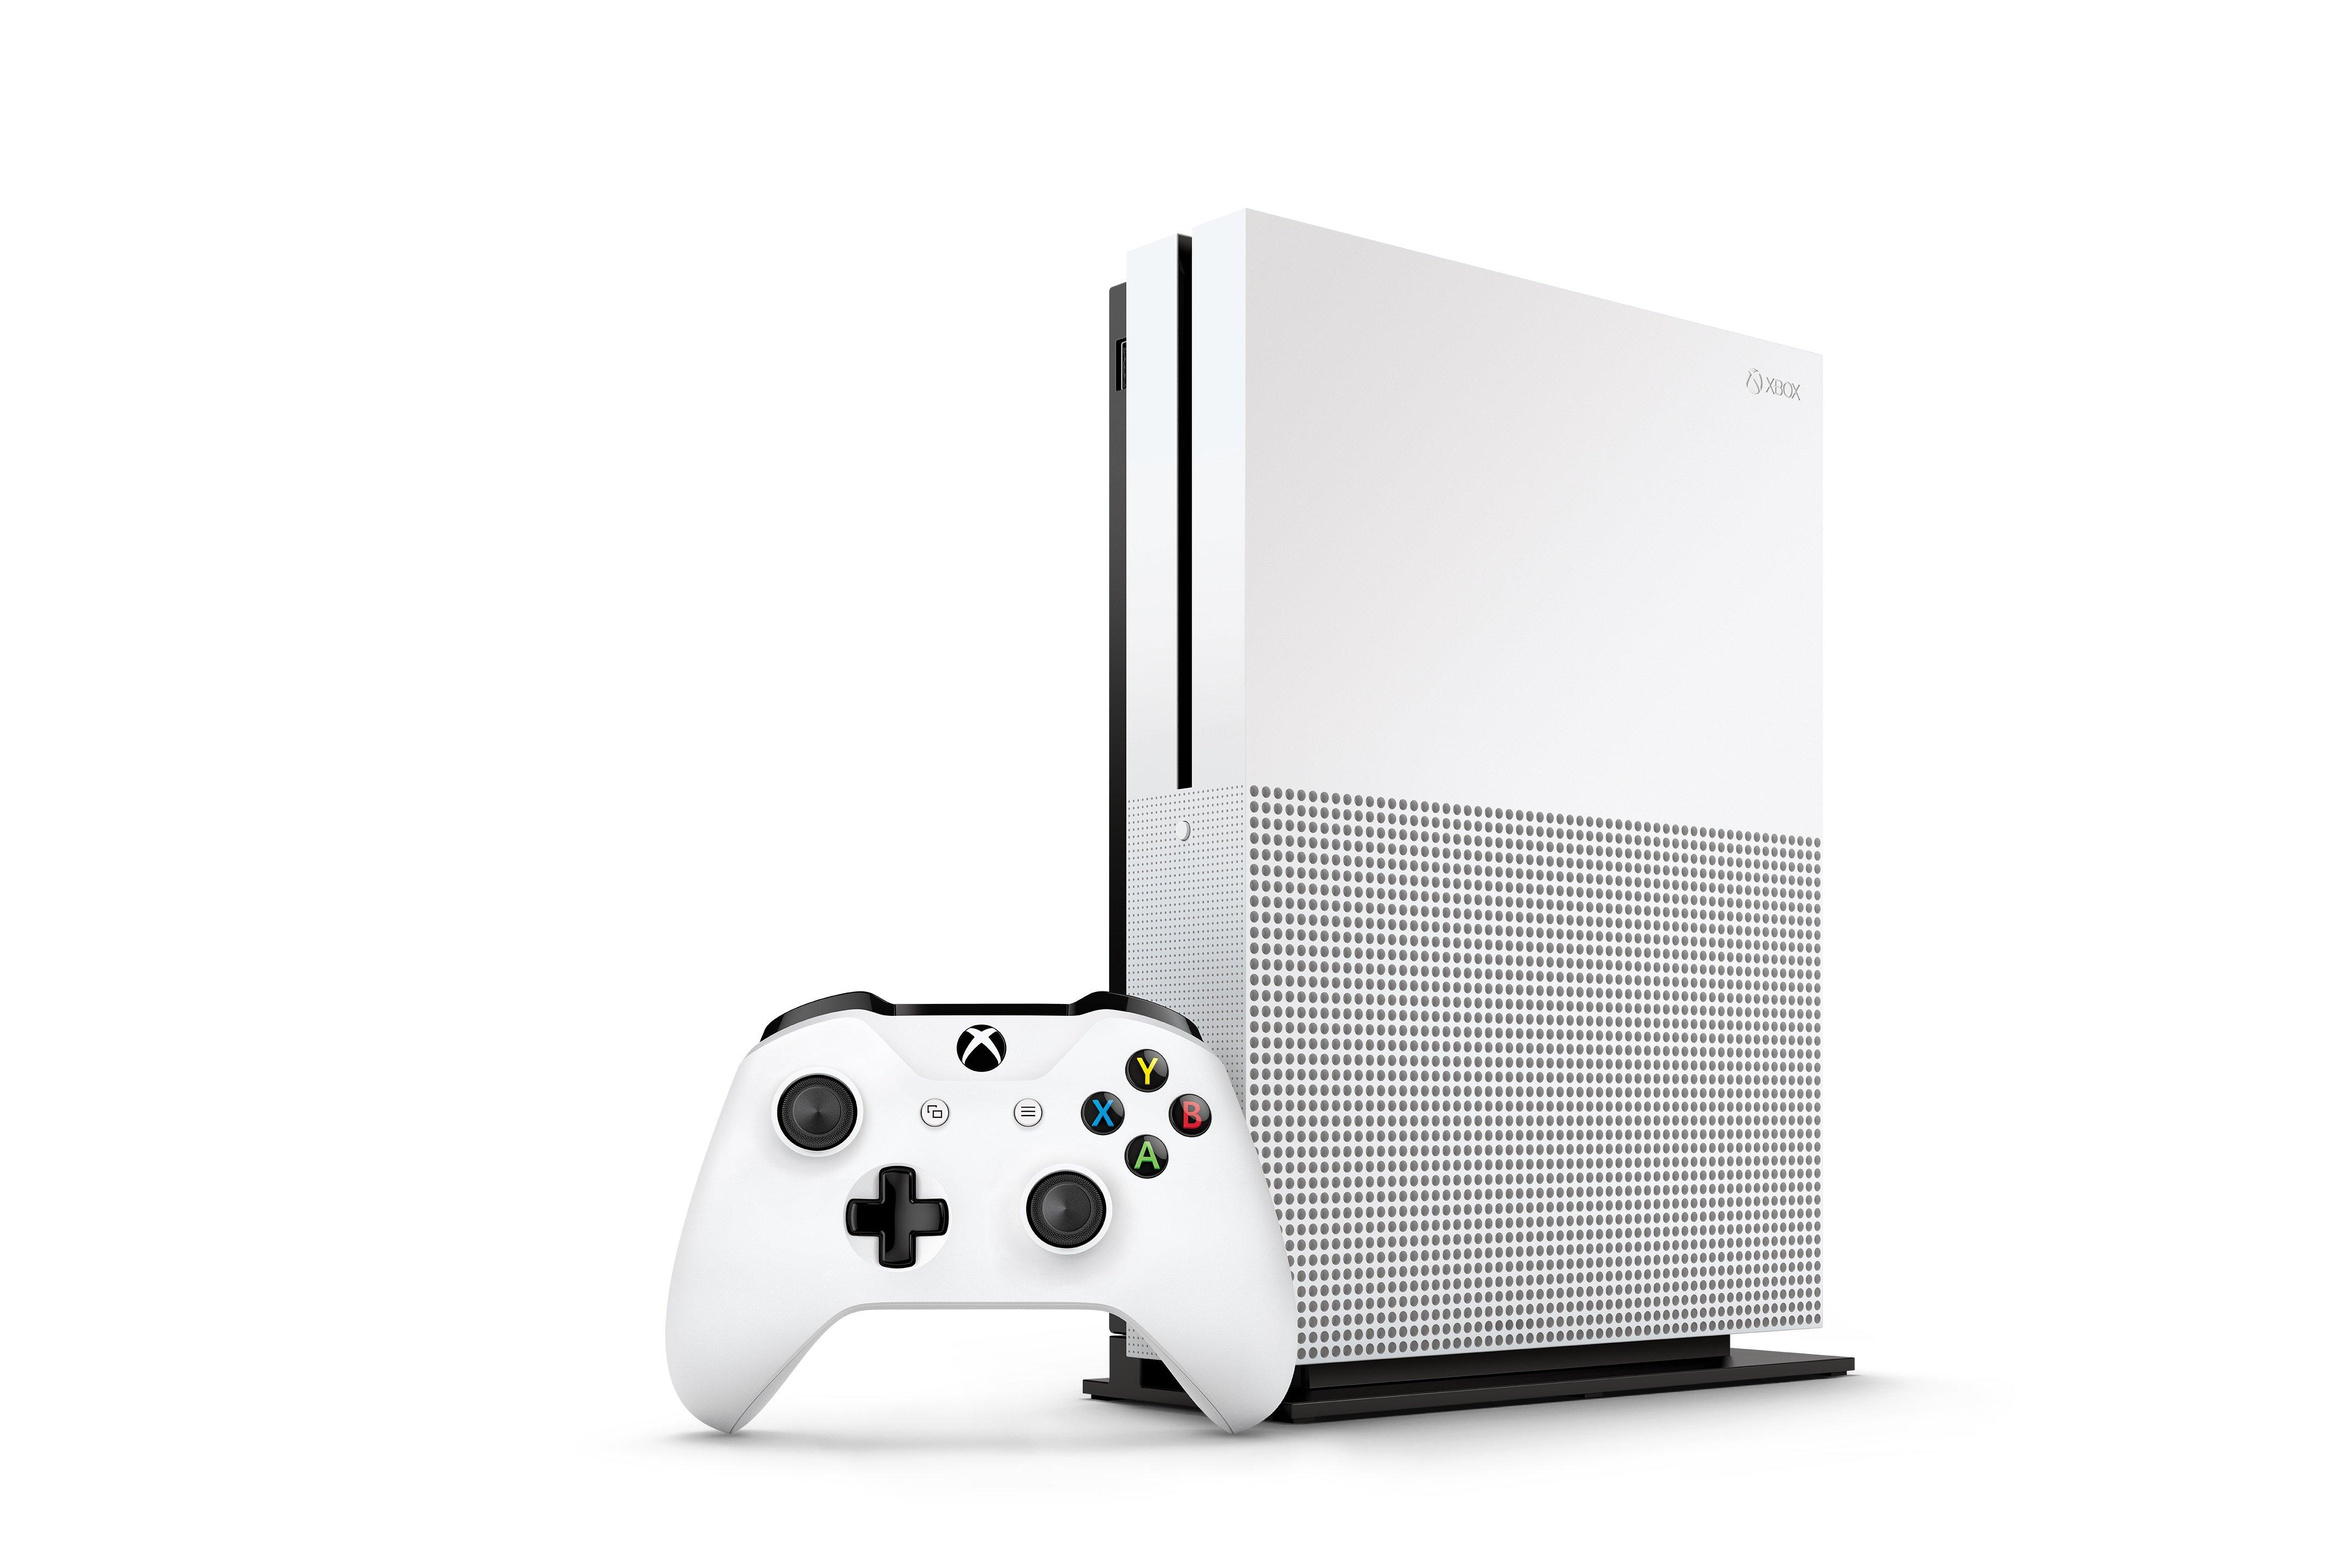 Disability audible tall Microsoft Xbox One S 500GB Console - White | GameStop